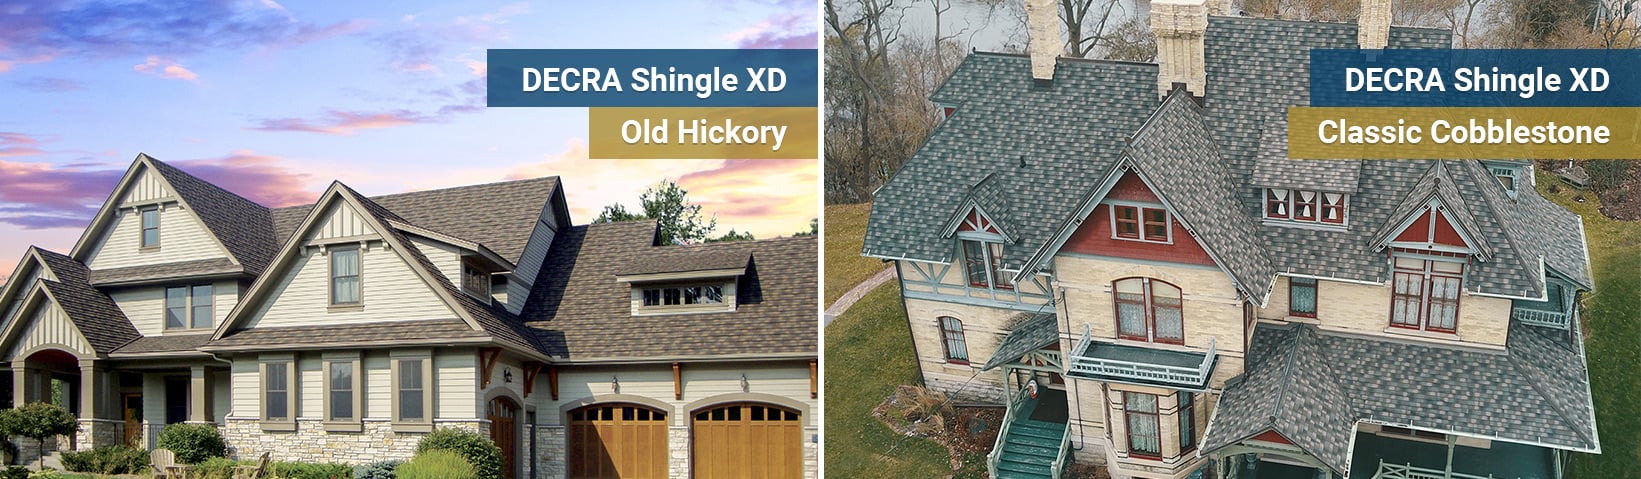 decra-metal-roofing-web-metal-roofing-products-side-by-side-shingleXD